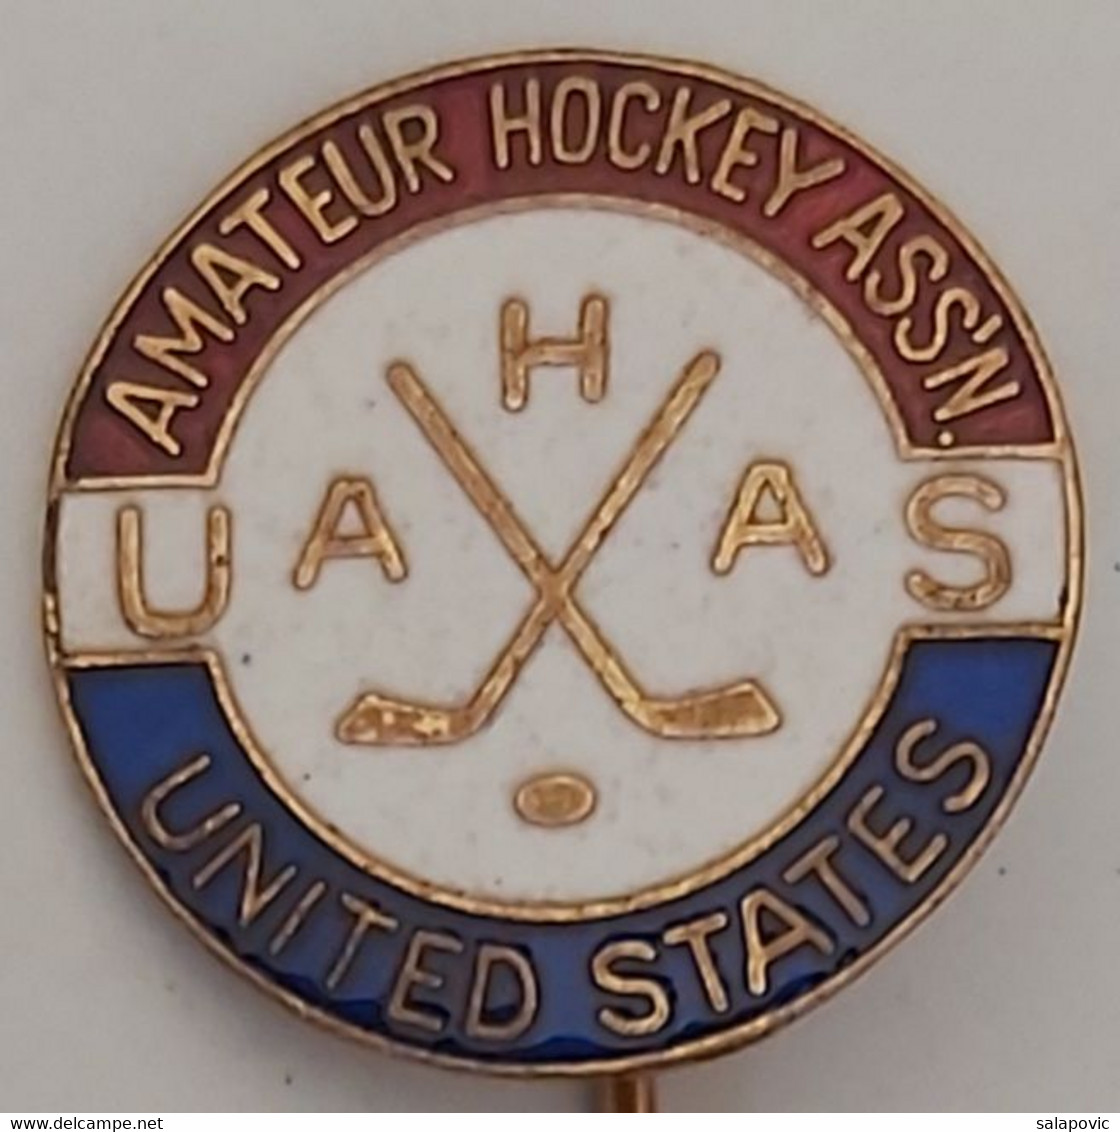 Amateur Hockey Ass'n United States Ice Hockey PINS A10/7 - Sports D'hiver